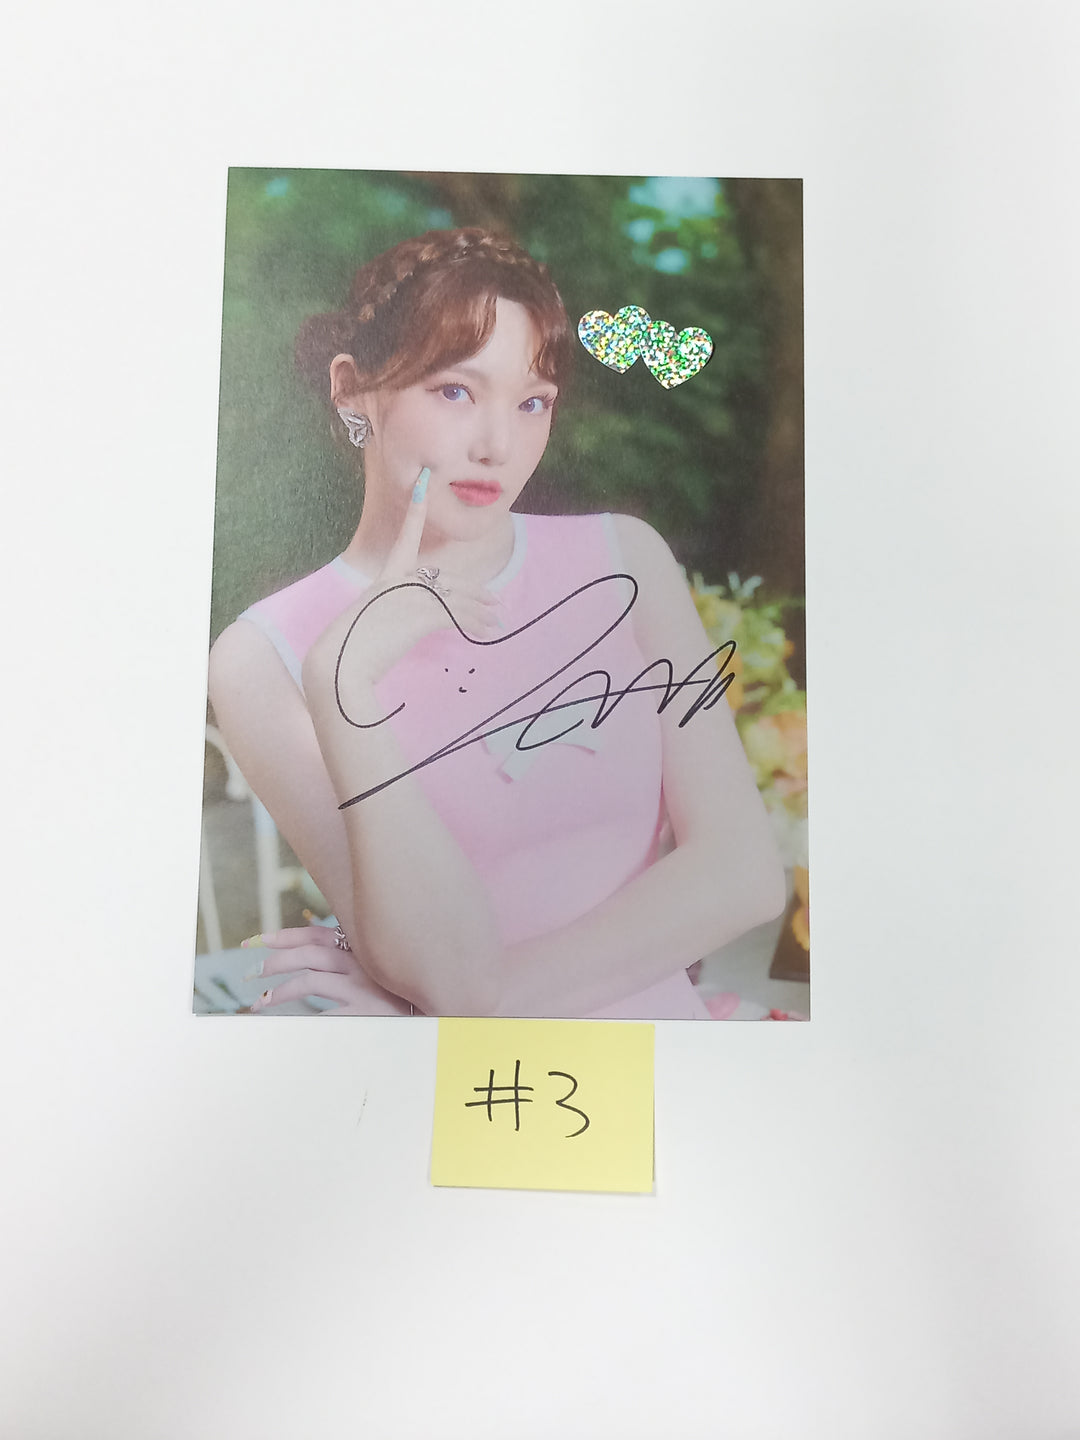 YERIN 'Ready, Set, LOVE' - A Cut Page From Fansign Event Album [23.10.11]